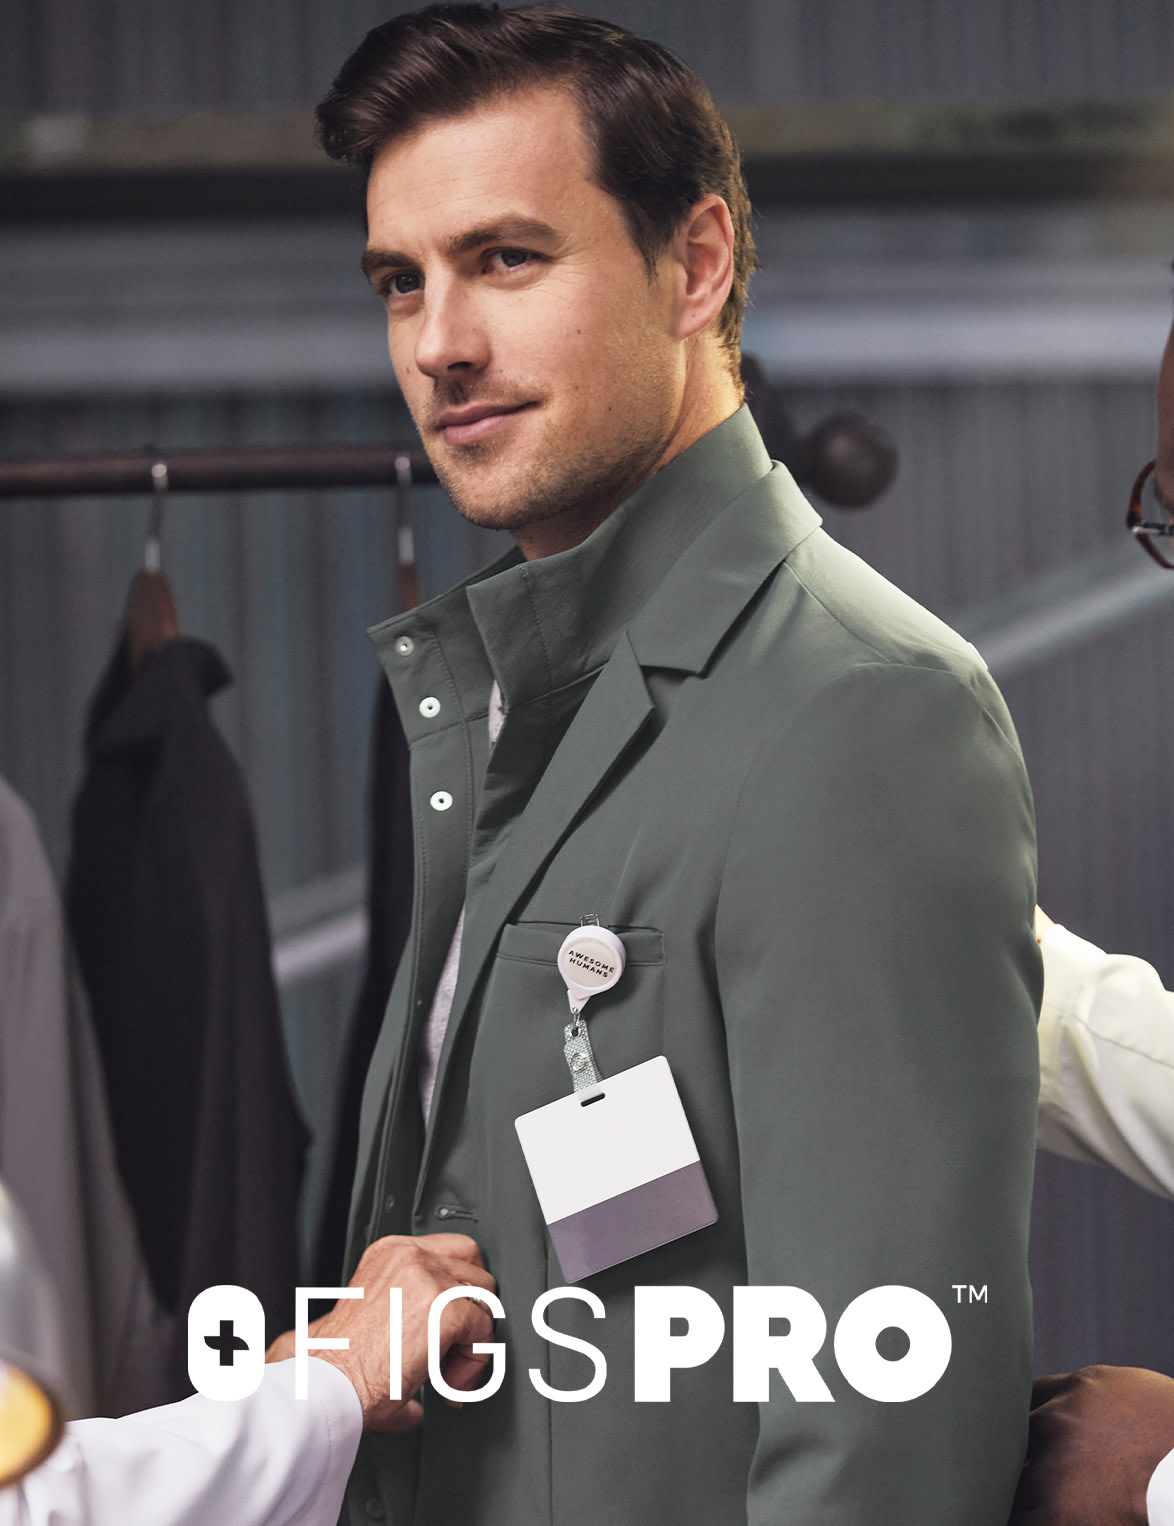 FIGSPRO™ High Collar Lab Coat — Engineered with nine pockets, a slim fit, and a liquid repellent inner collar to keep you covered.